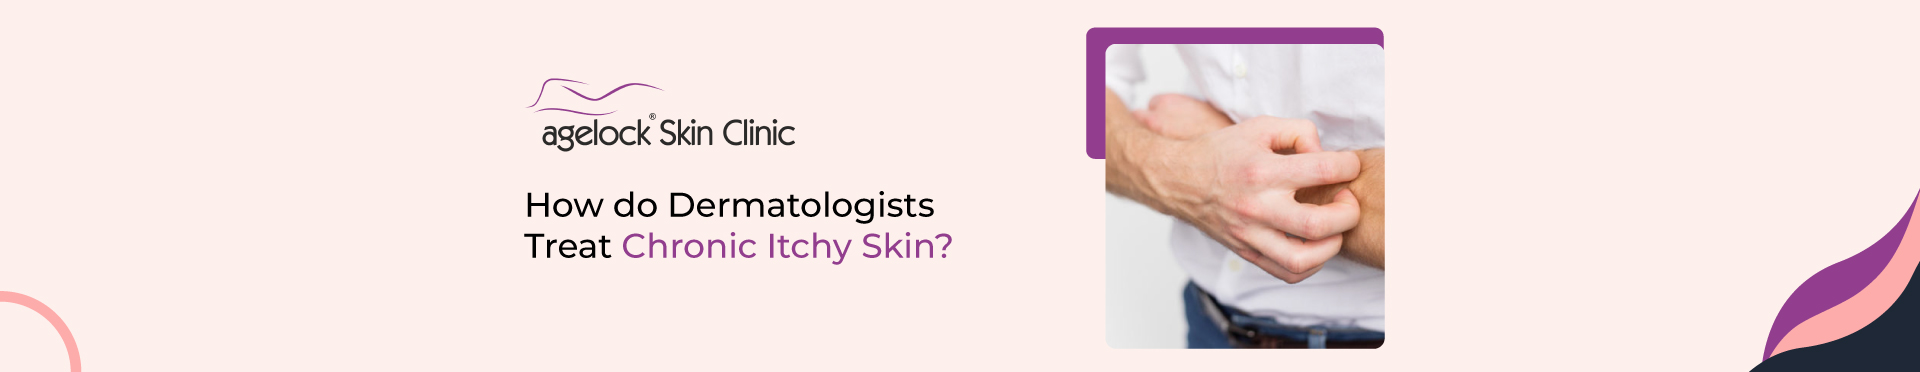 <strong>How do dermatologists treat chronic itchy skin?</strong>